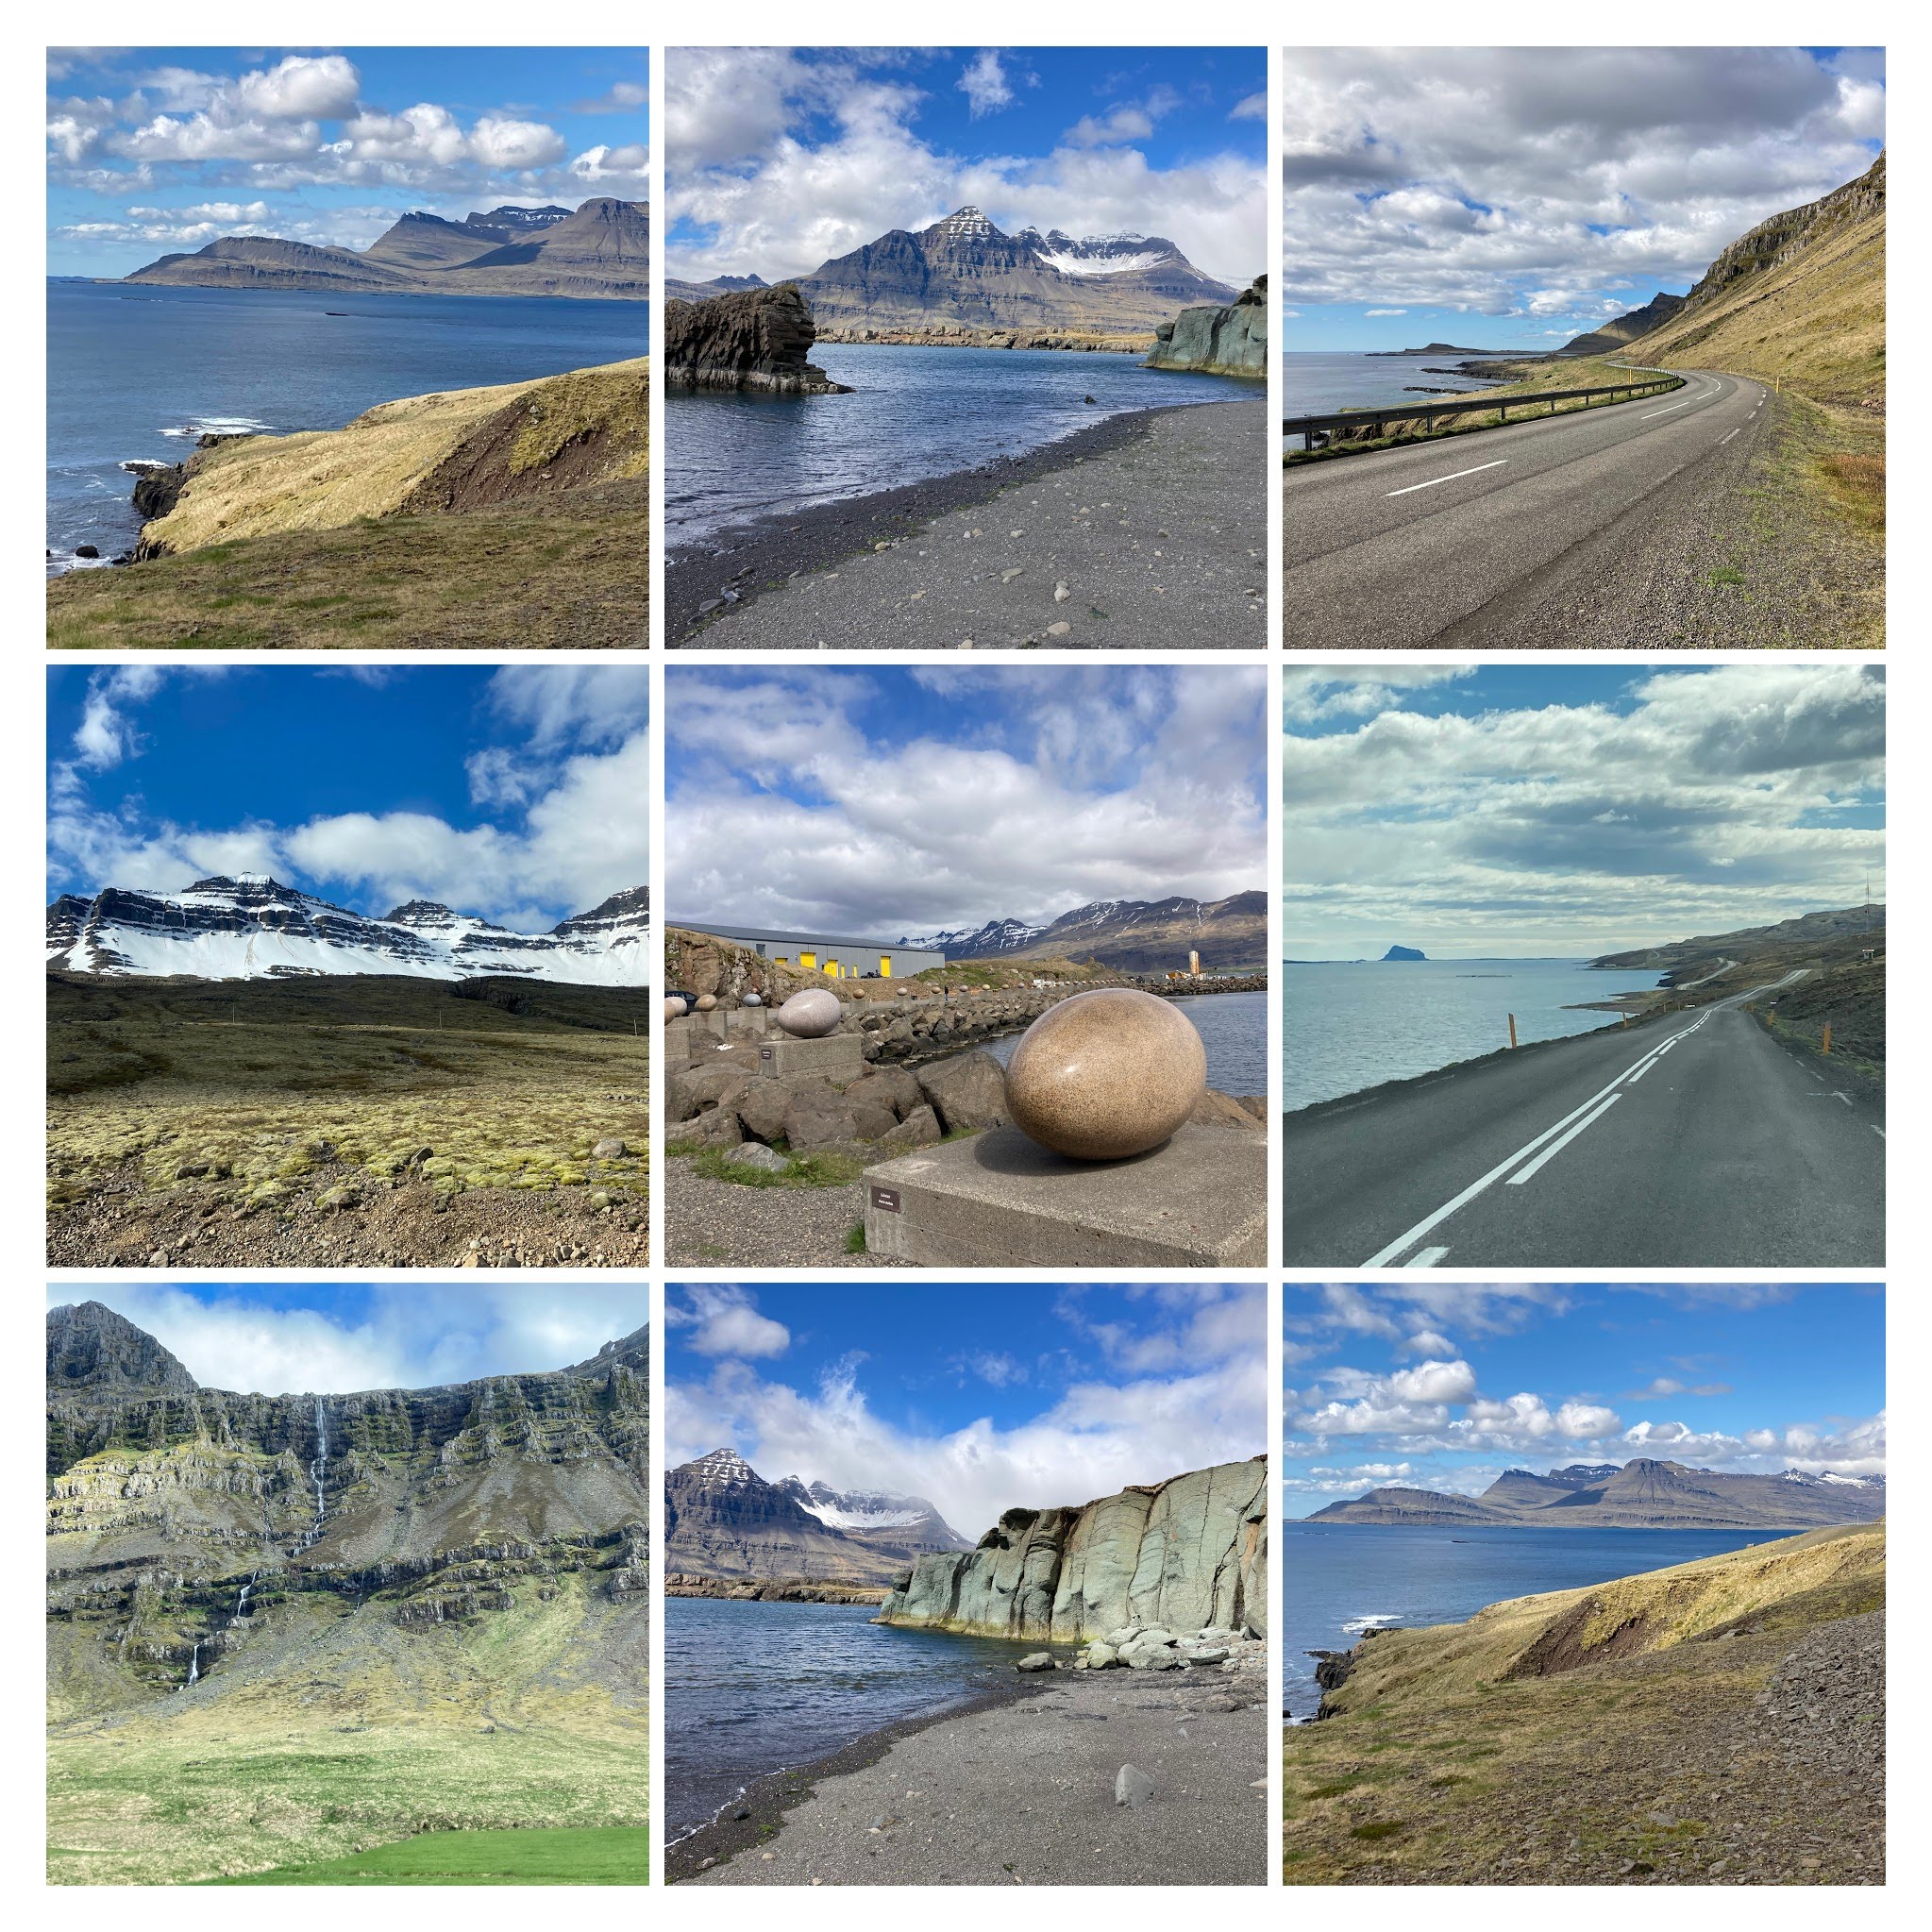 Eastern and Southern Iceland